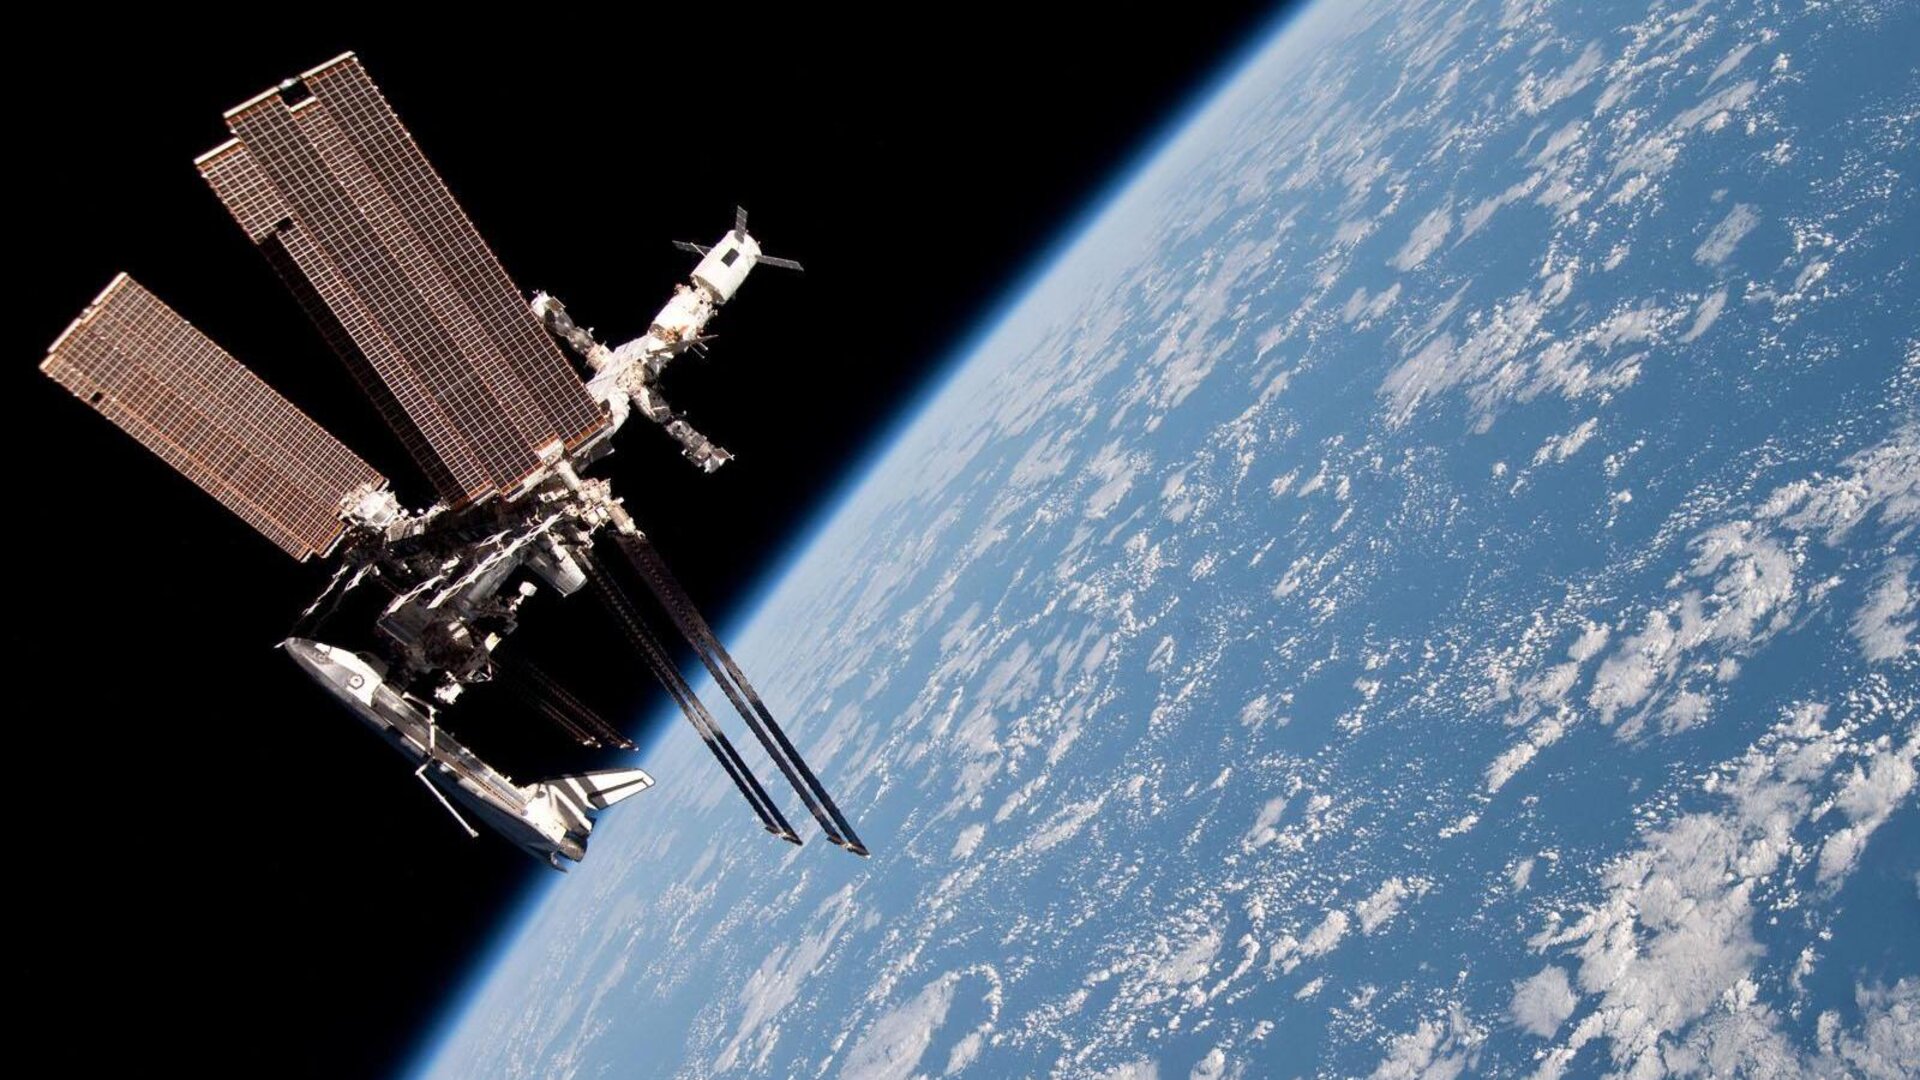 International Space Station with docked ATV, Soyuz and Space Shuttle